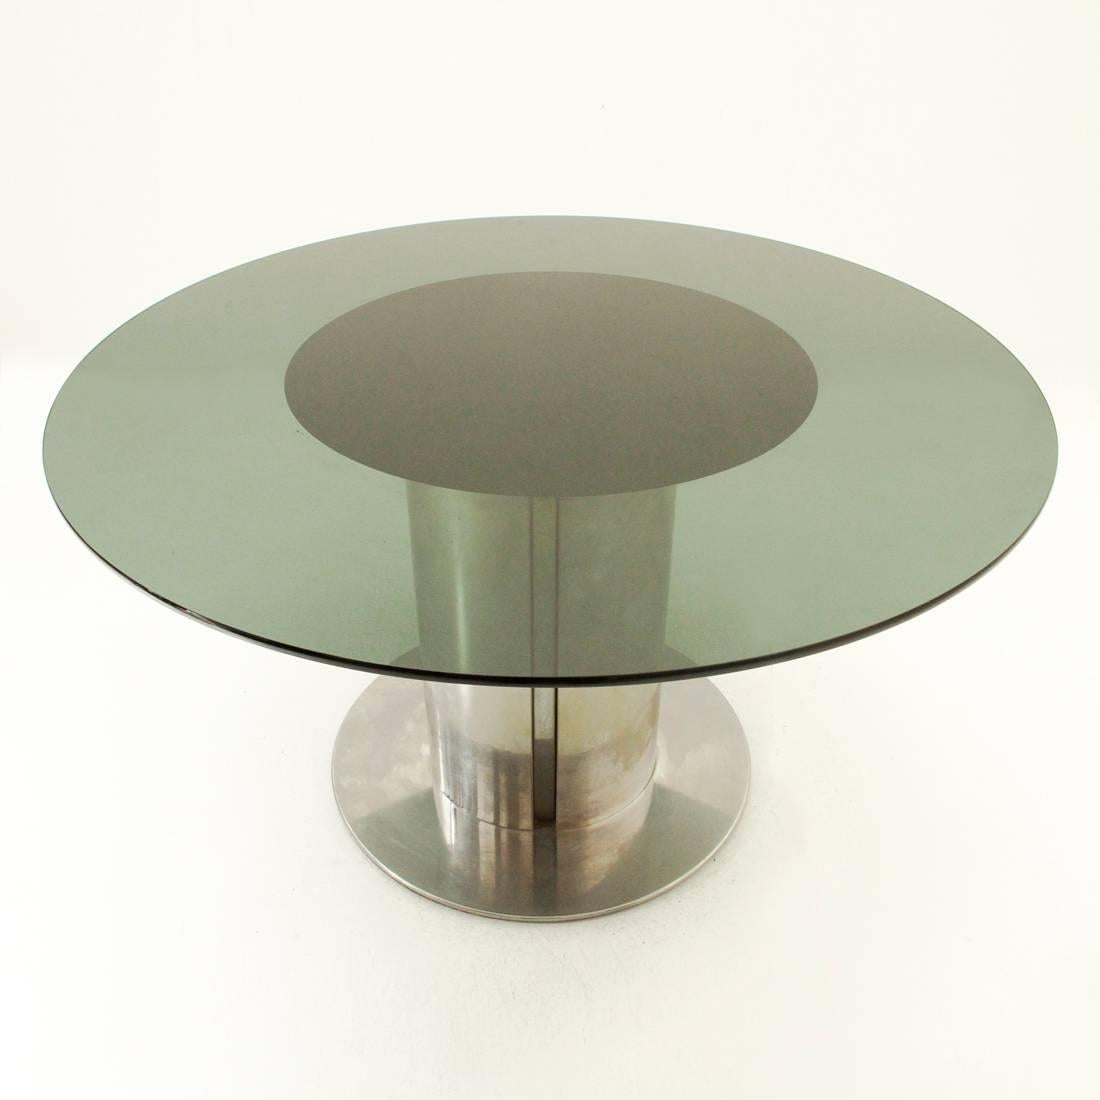 Table with circular top produced by Cidue in the 1970s.
Iridescent steel structure with circular plan with four flares along the leg.
Smoked glass top with slightly bevelled edge.
Good general conditions.

Dimensions: Diameter 129 cm, height 73